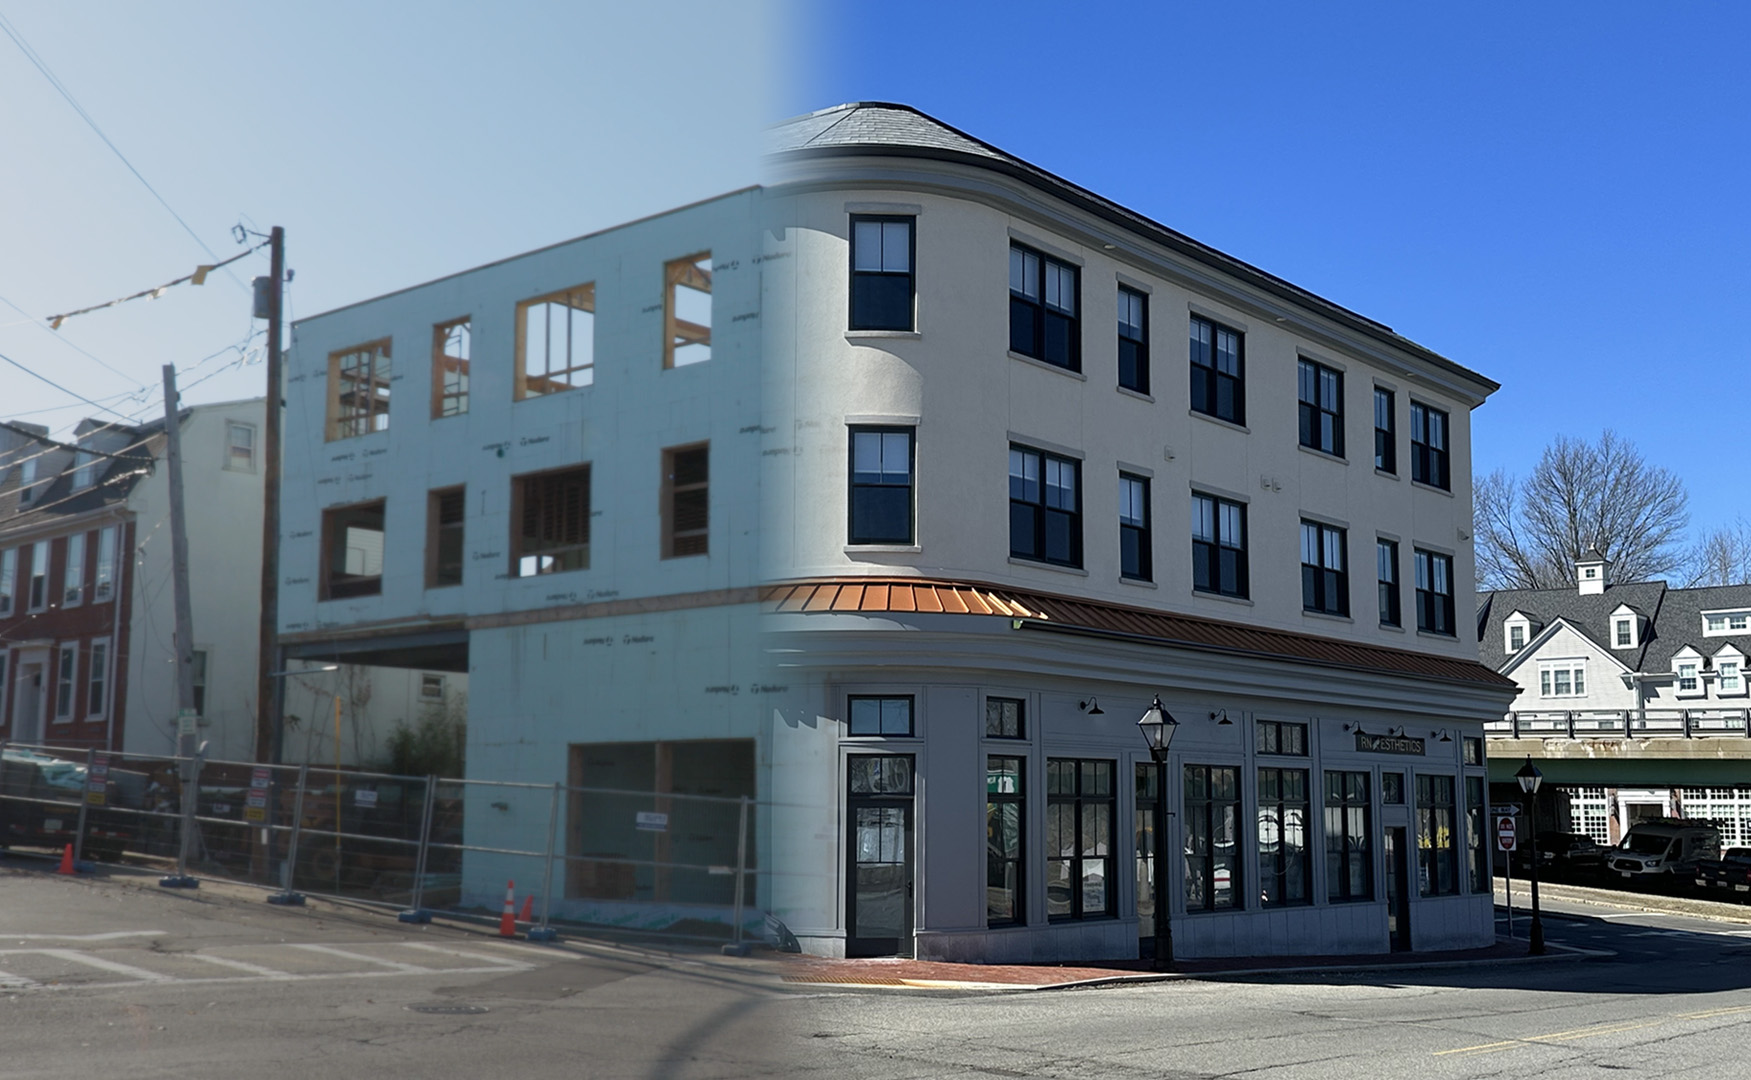 icf mixed-use building before and after